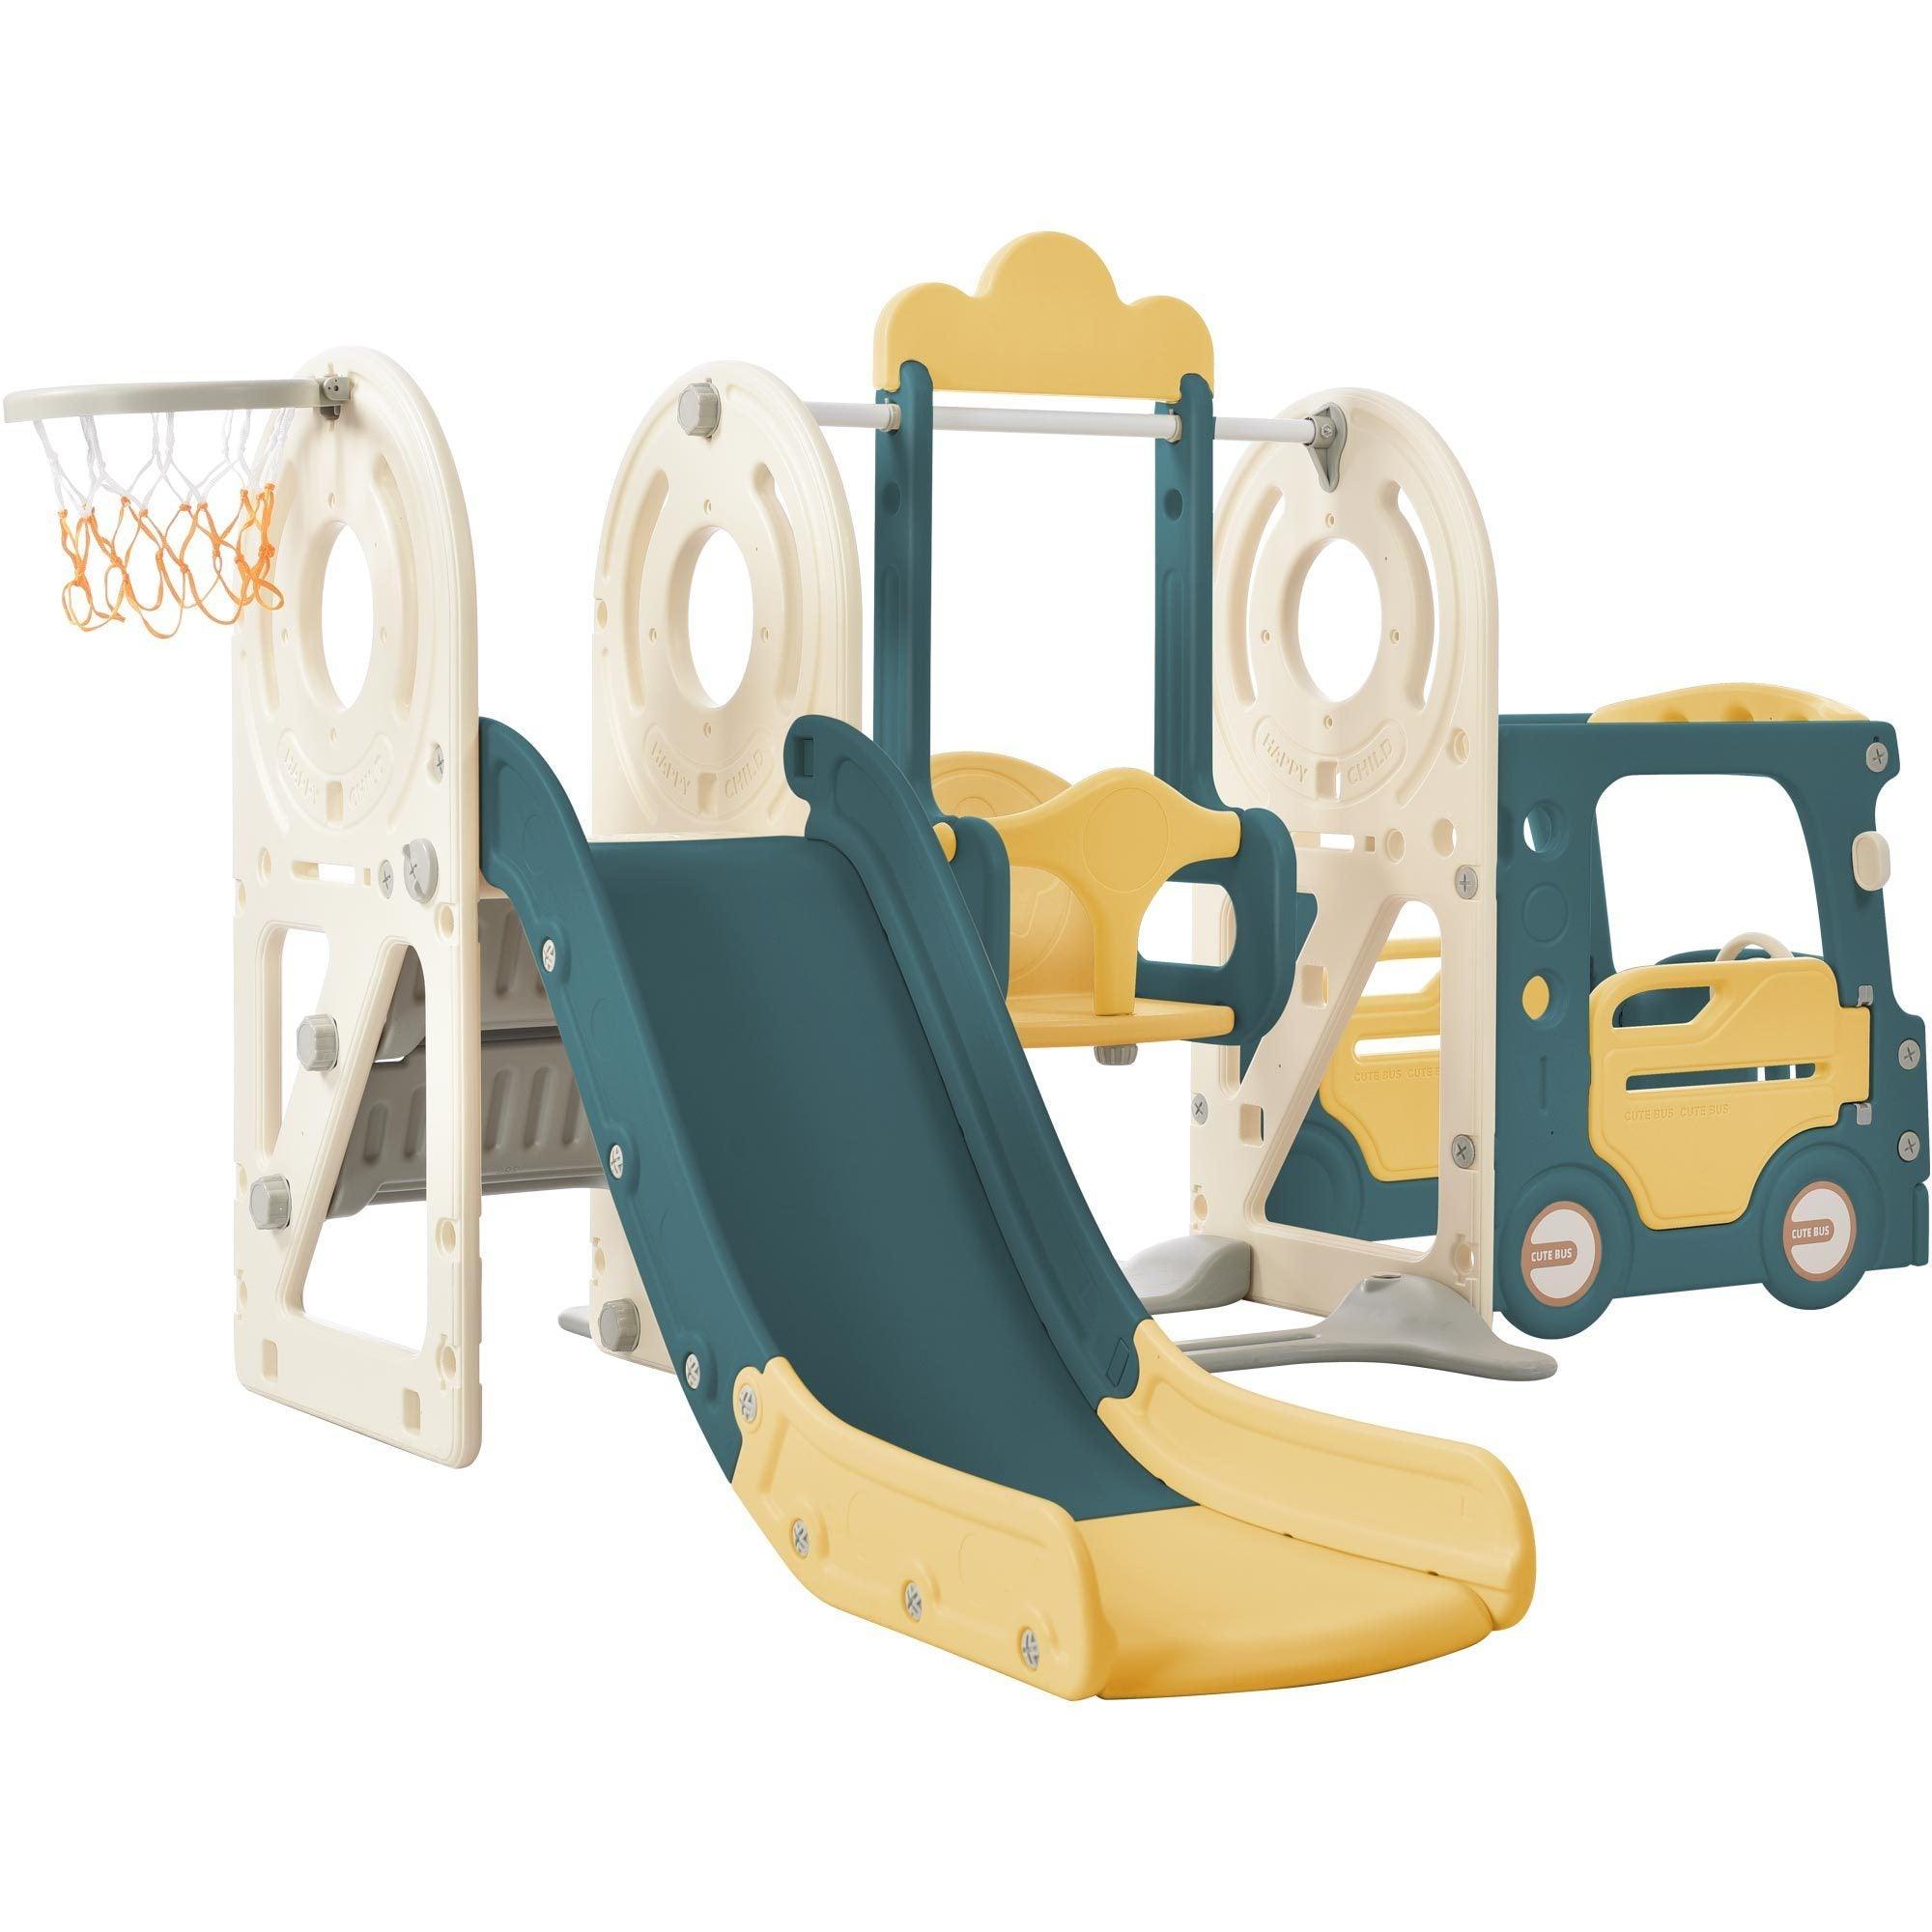 🆓🚛 Kids Swing-N-Slide With Bus Play Structure, Freestanding Bus Toy With Slide&Swing for Toddlers, Bus Slide Set With Basketball Hoop, Blue & Yellow